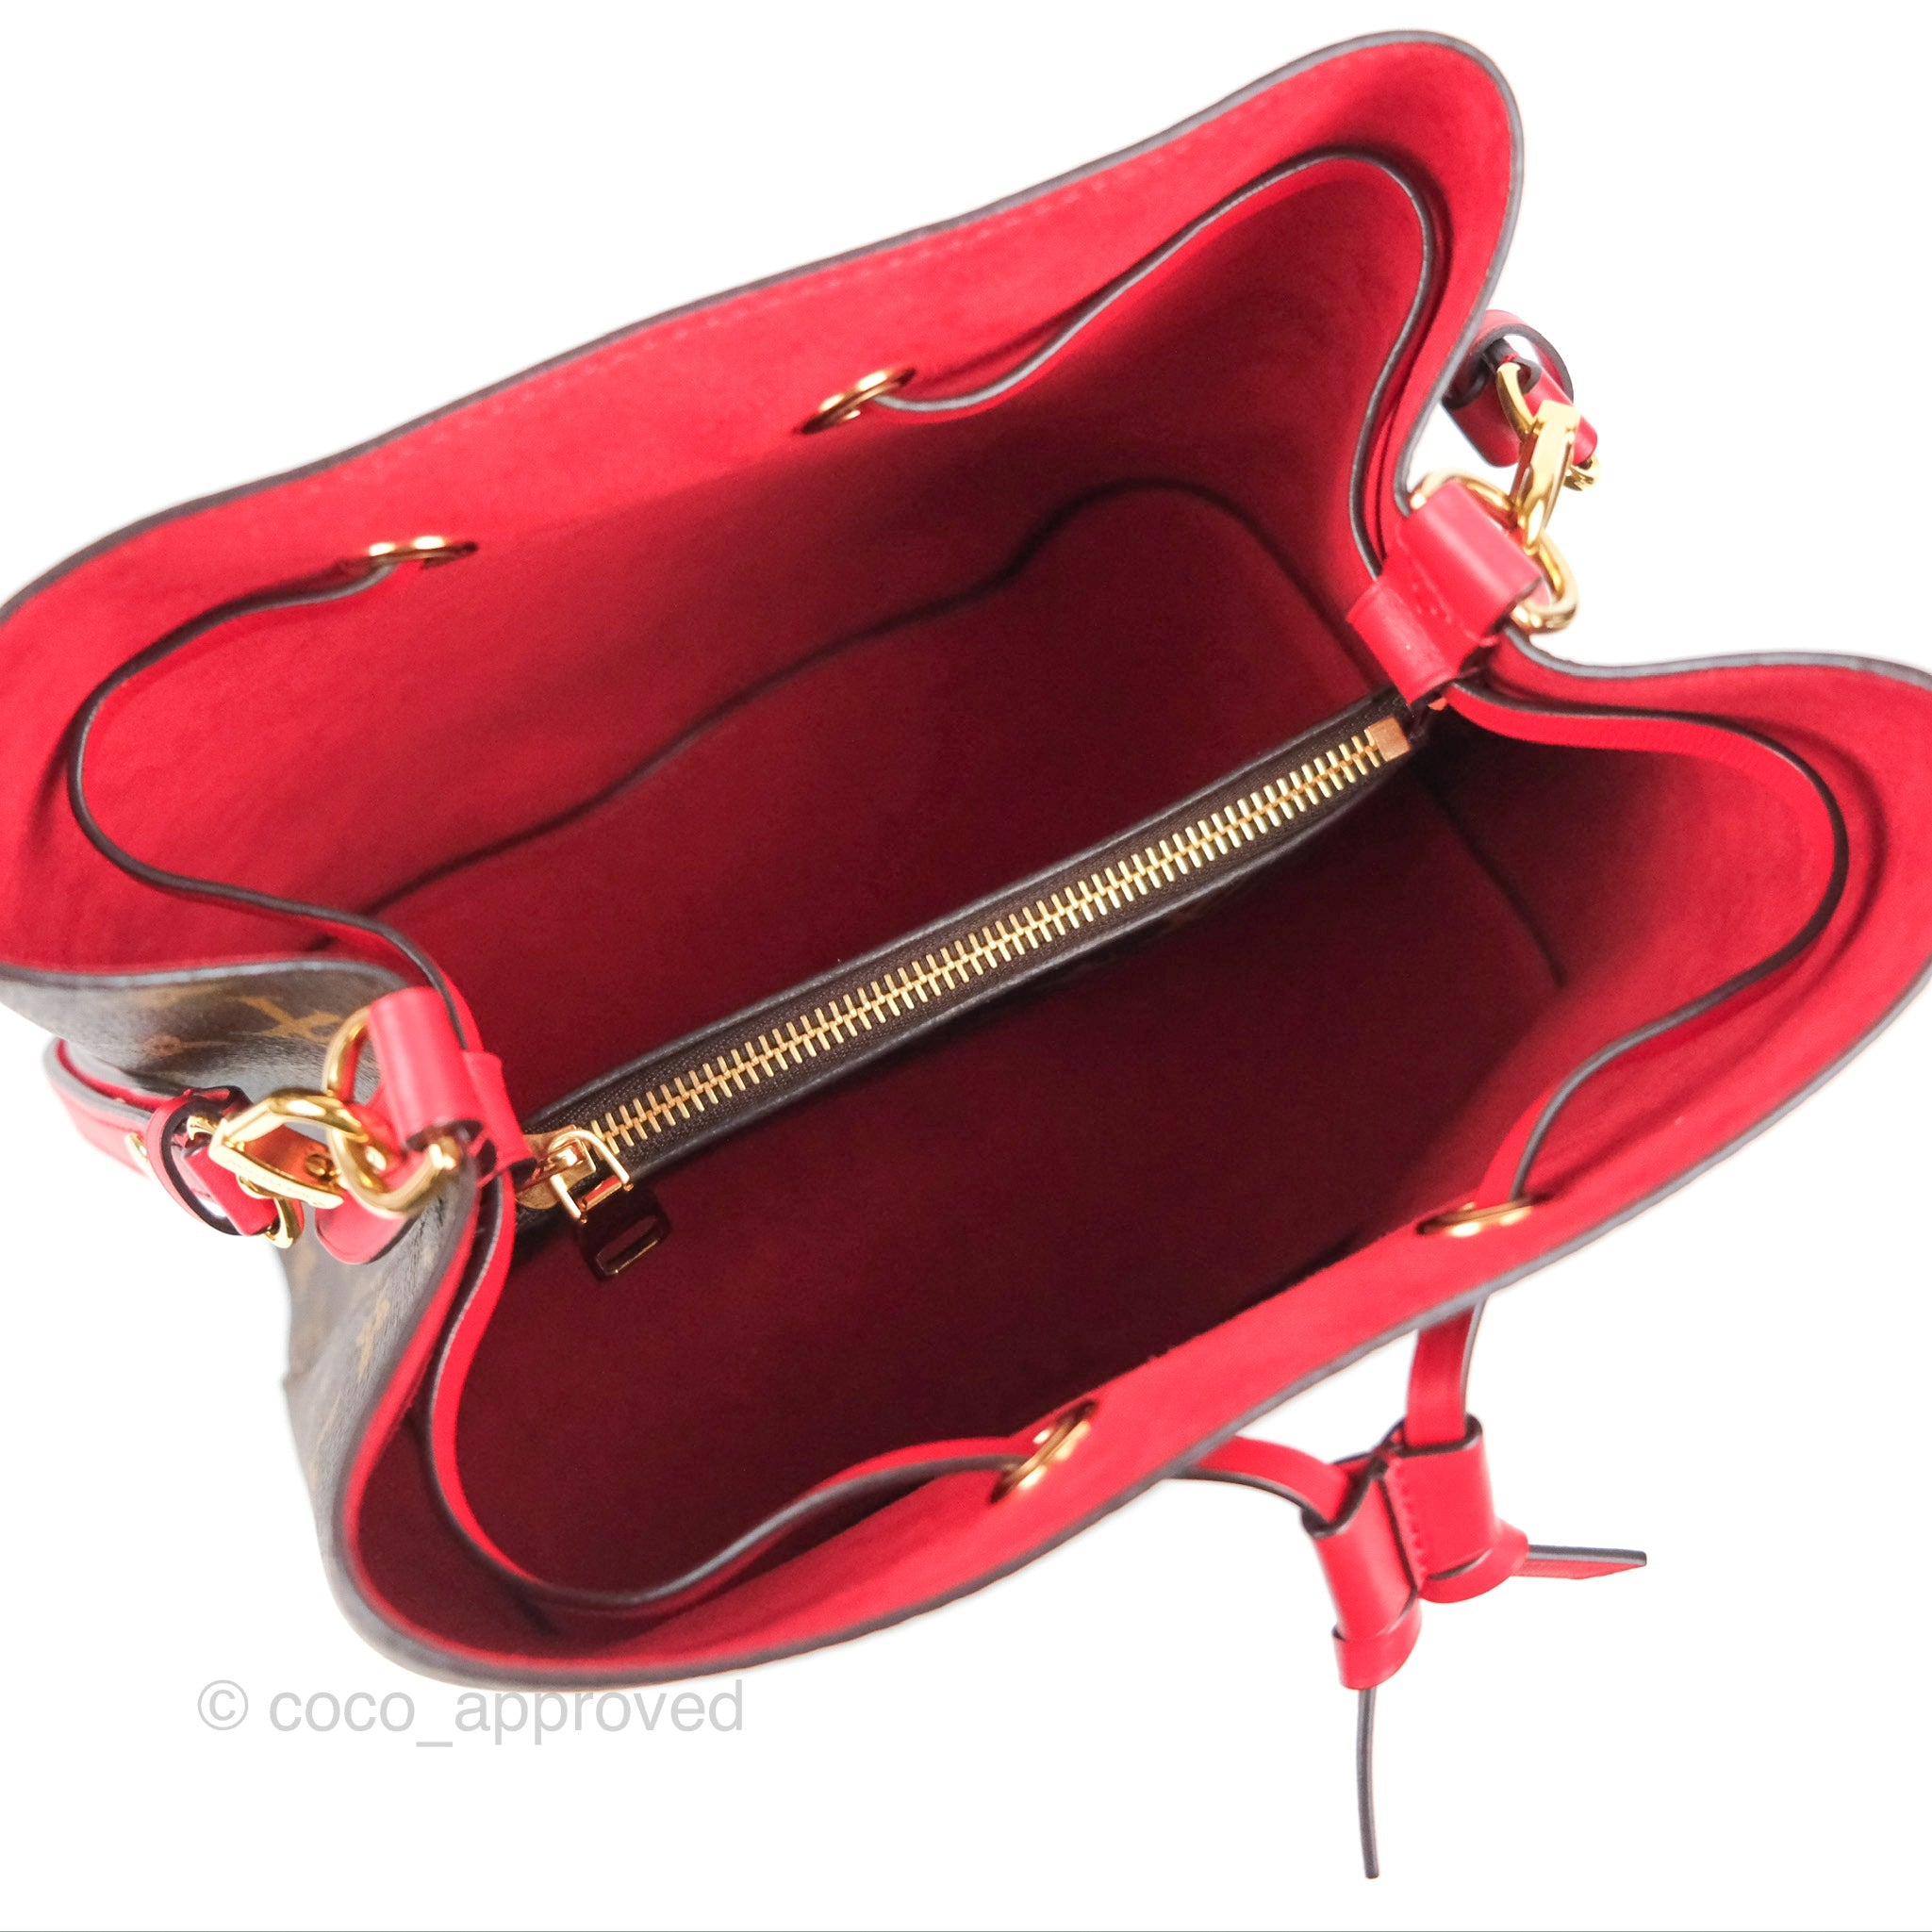 At Auction: A LOUIS VUITTON PINKY RED PATENT LEATHER ZIPPER BAG